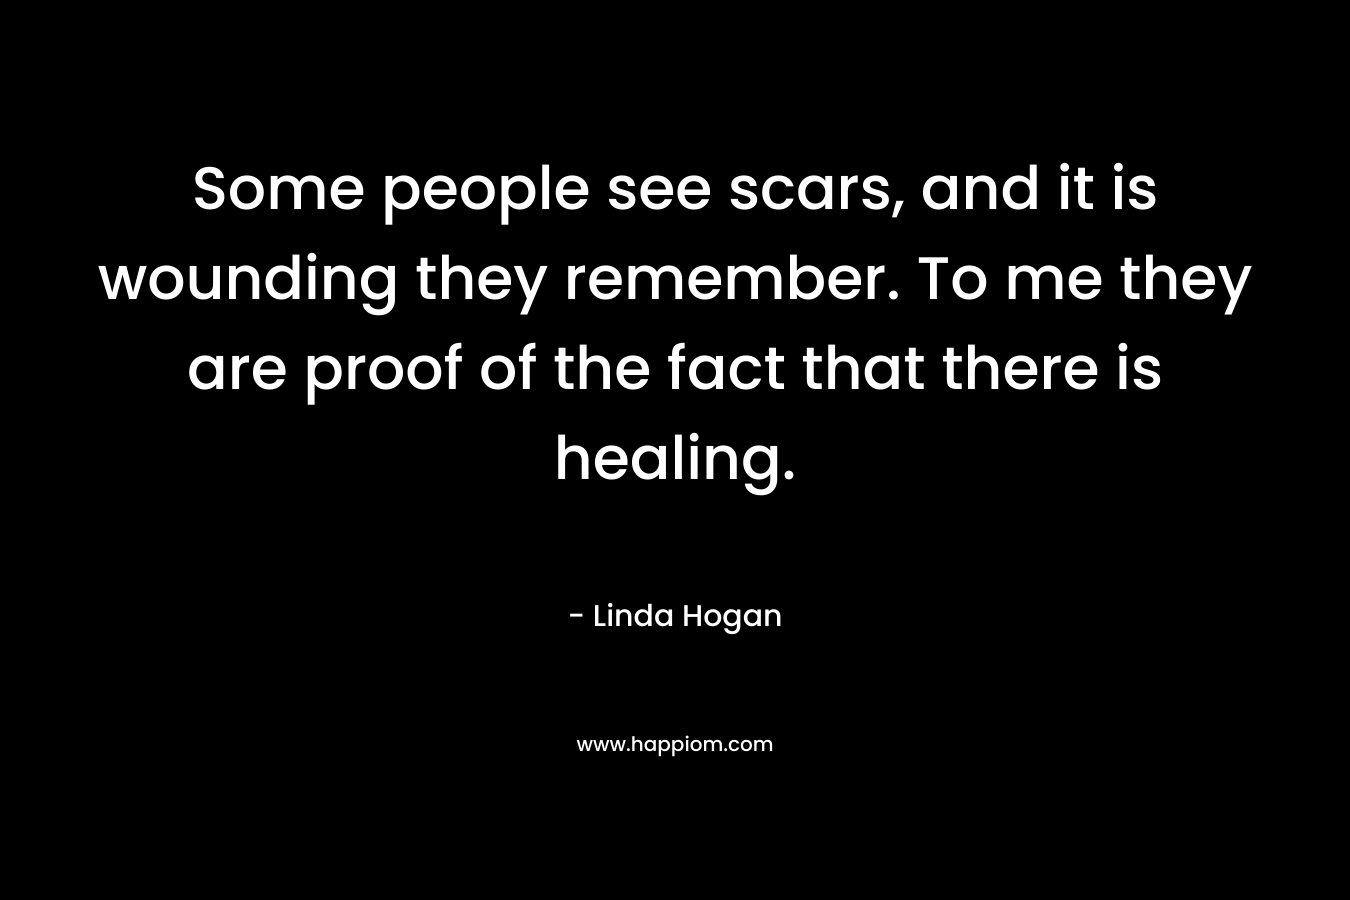 Some people see scars, and it is wounding they remember. To me they are proof of the fact that there is healing. – Linda Hogan